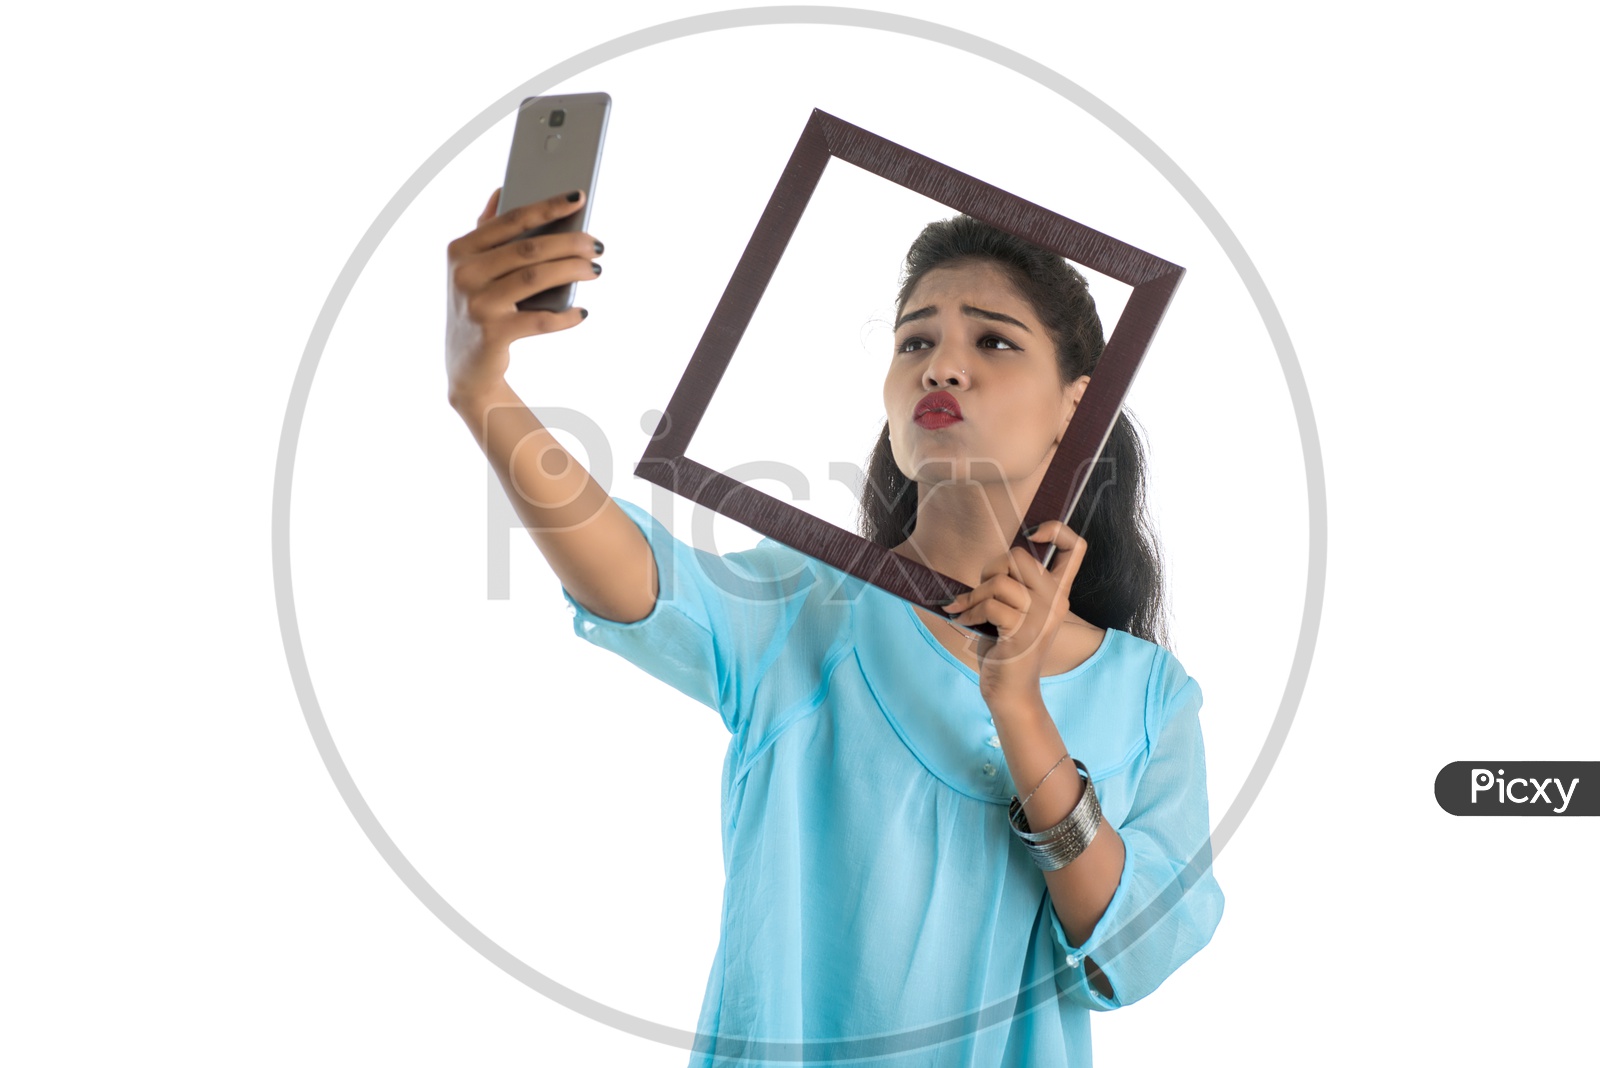 Pretty Young Indian Girl Taking Selfie Using Photo Fames in Her Smart Phone On an Isolated White Background